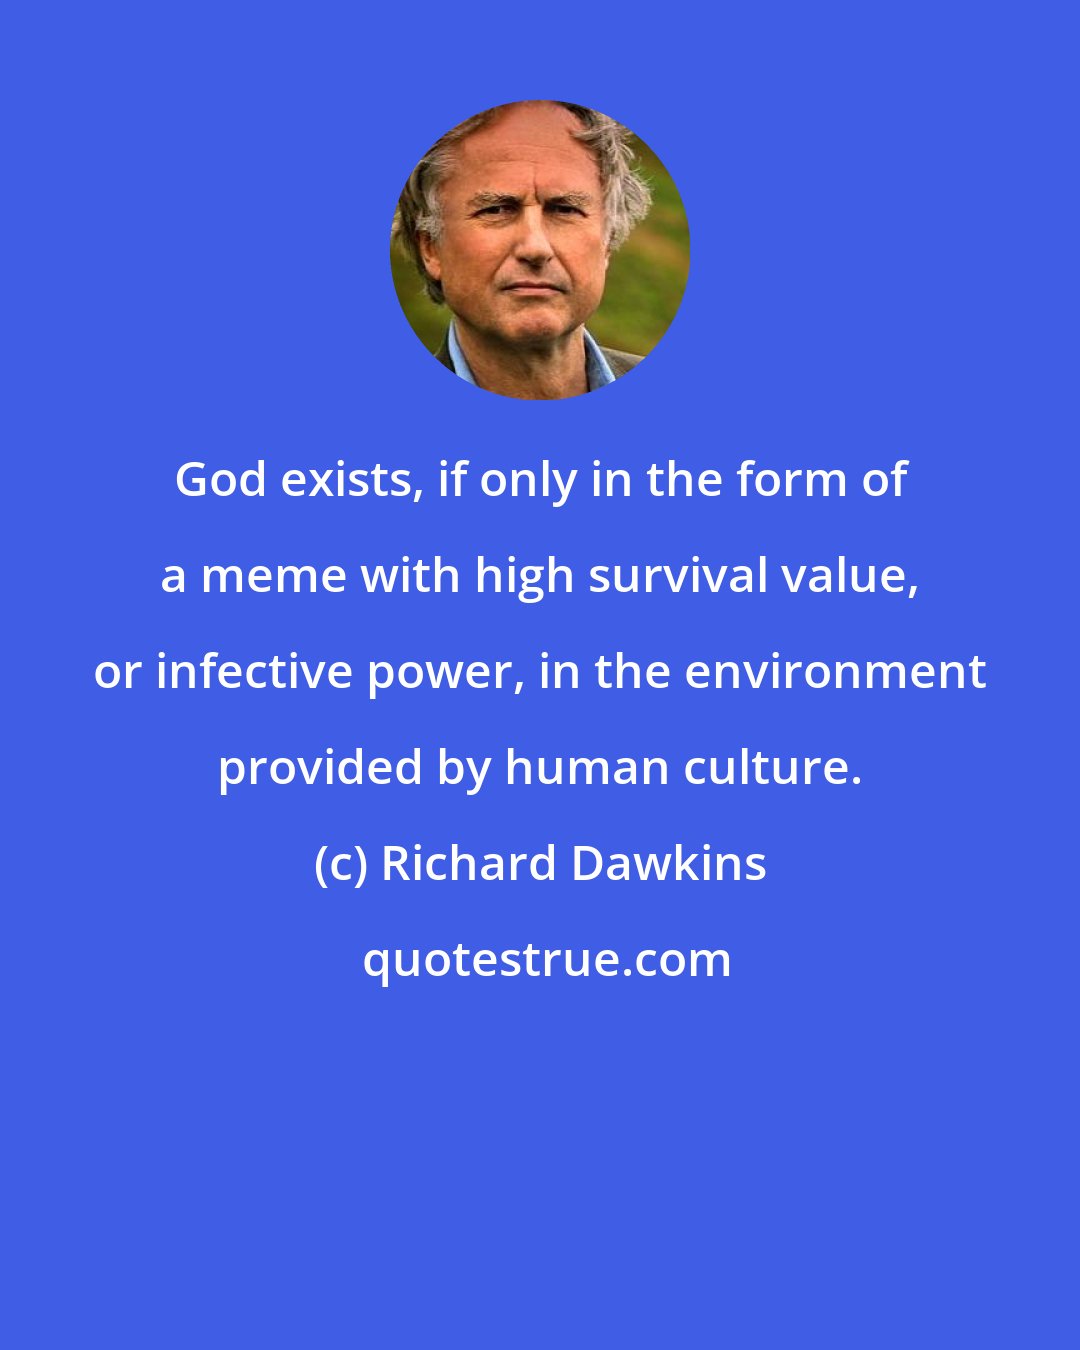 Richard Dawkins: God exists, if only in the form of a meme with high survival value, or infective power, in the environment provided by human culture.